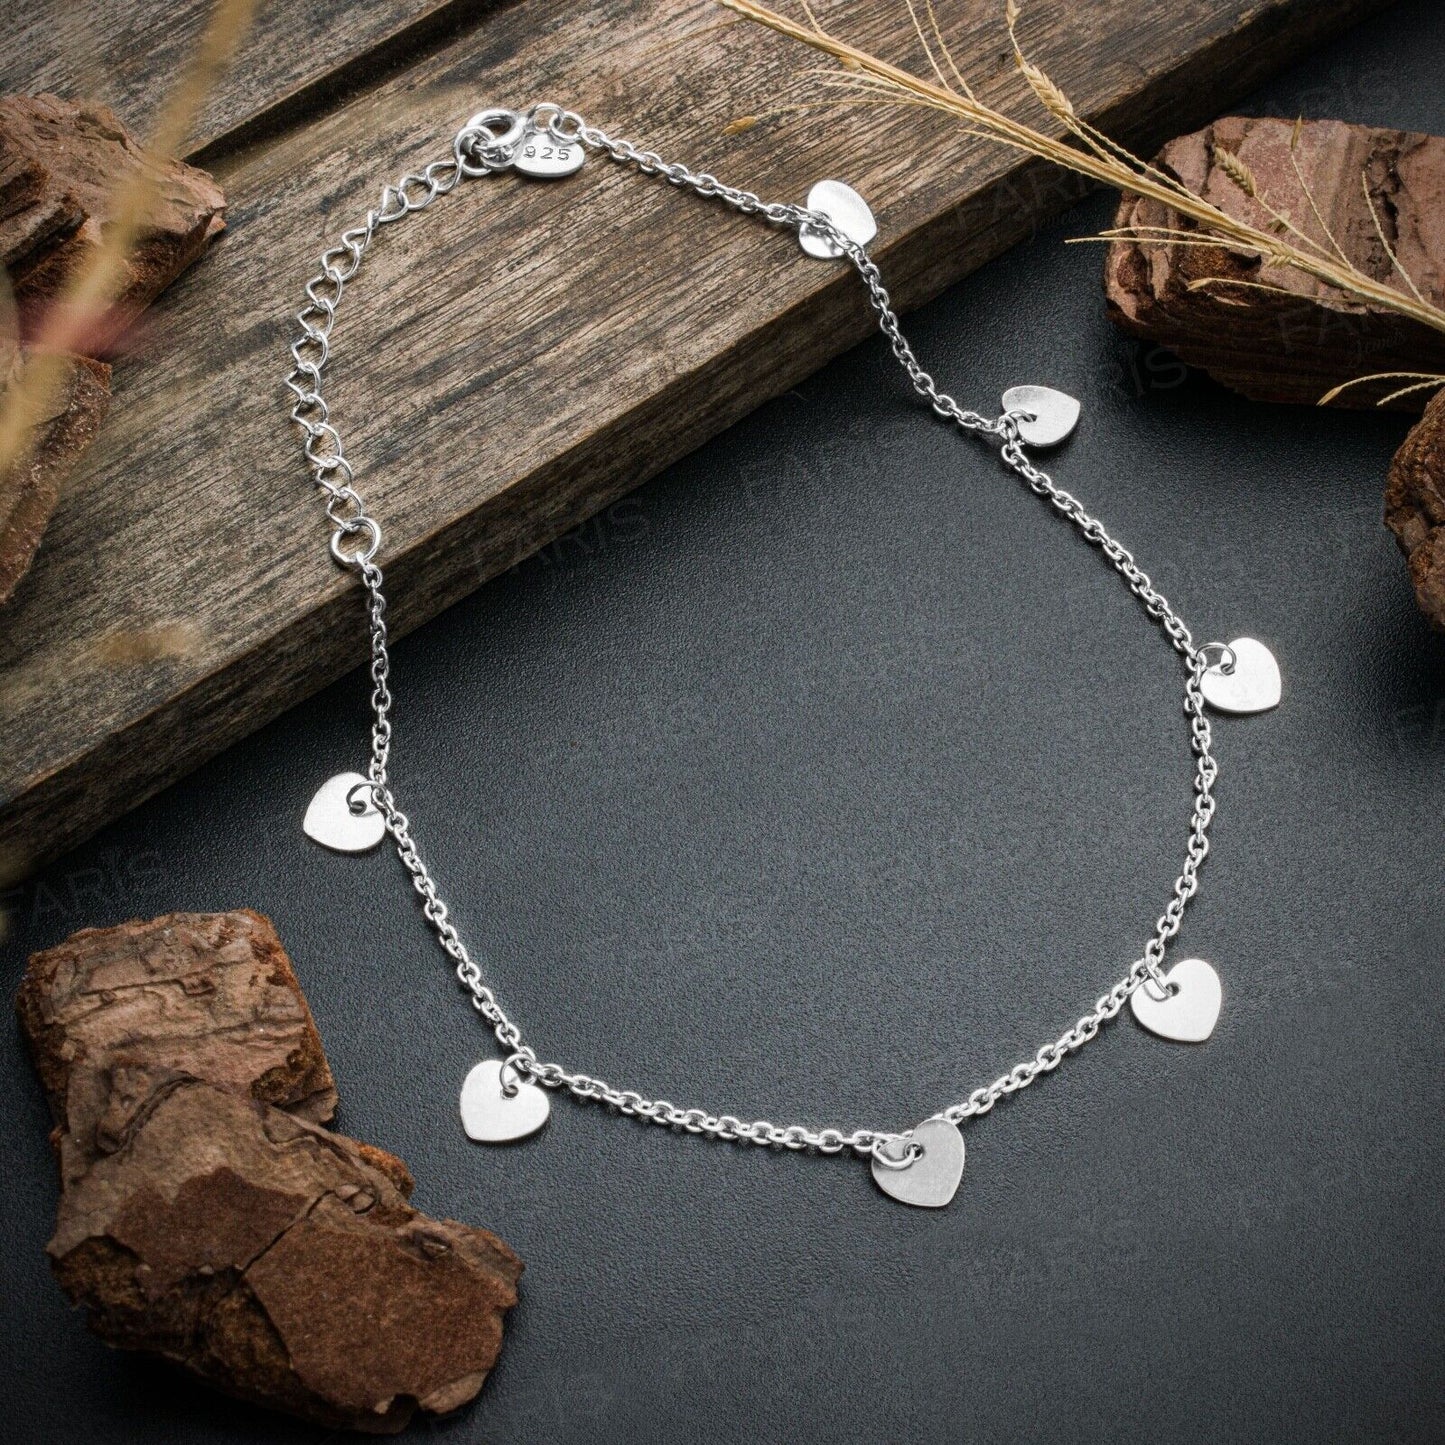 Adjustable Solid 925 Sterling Silver Heart Anklet Ladies Jewellery Gift - Faris Jewels